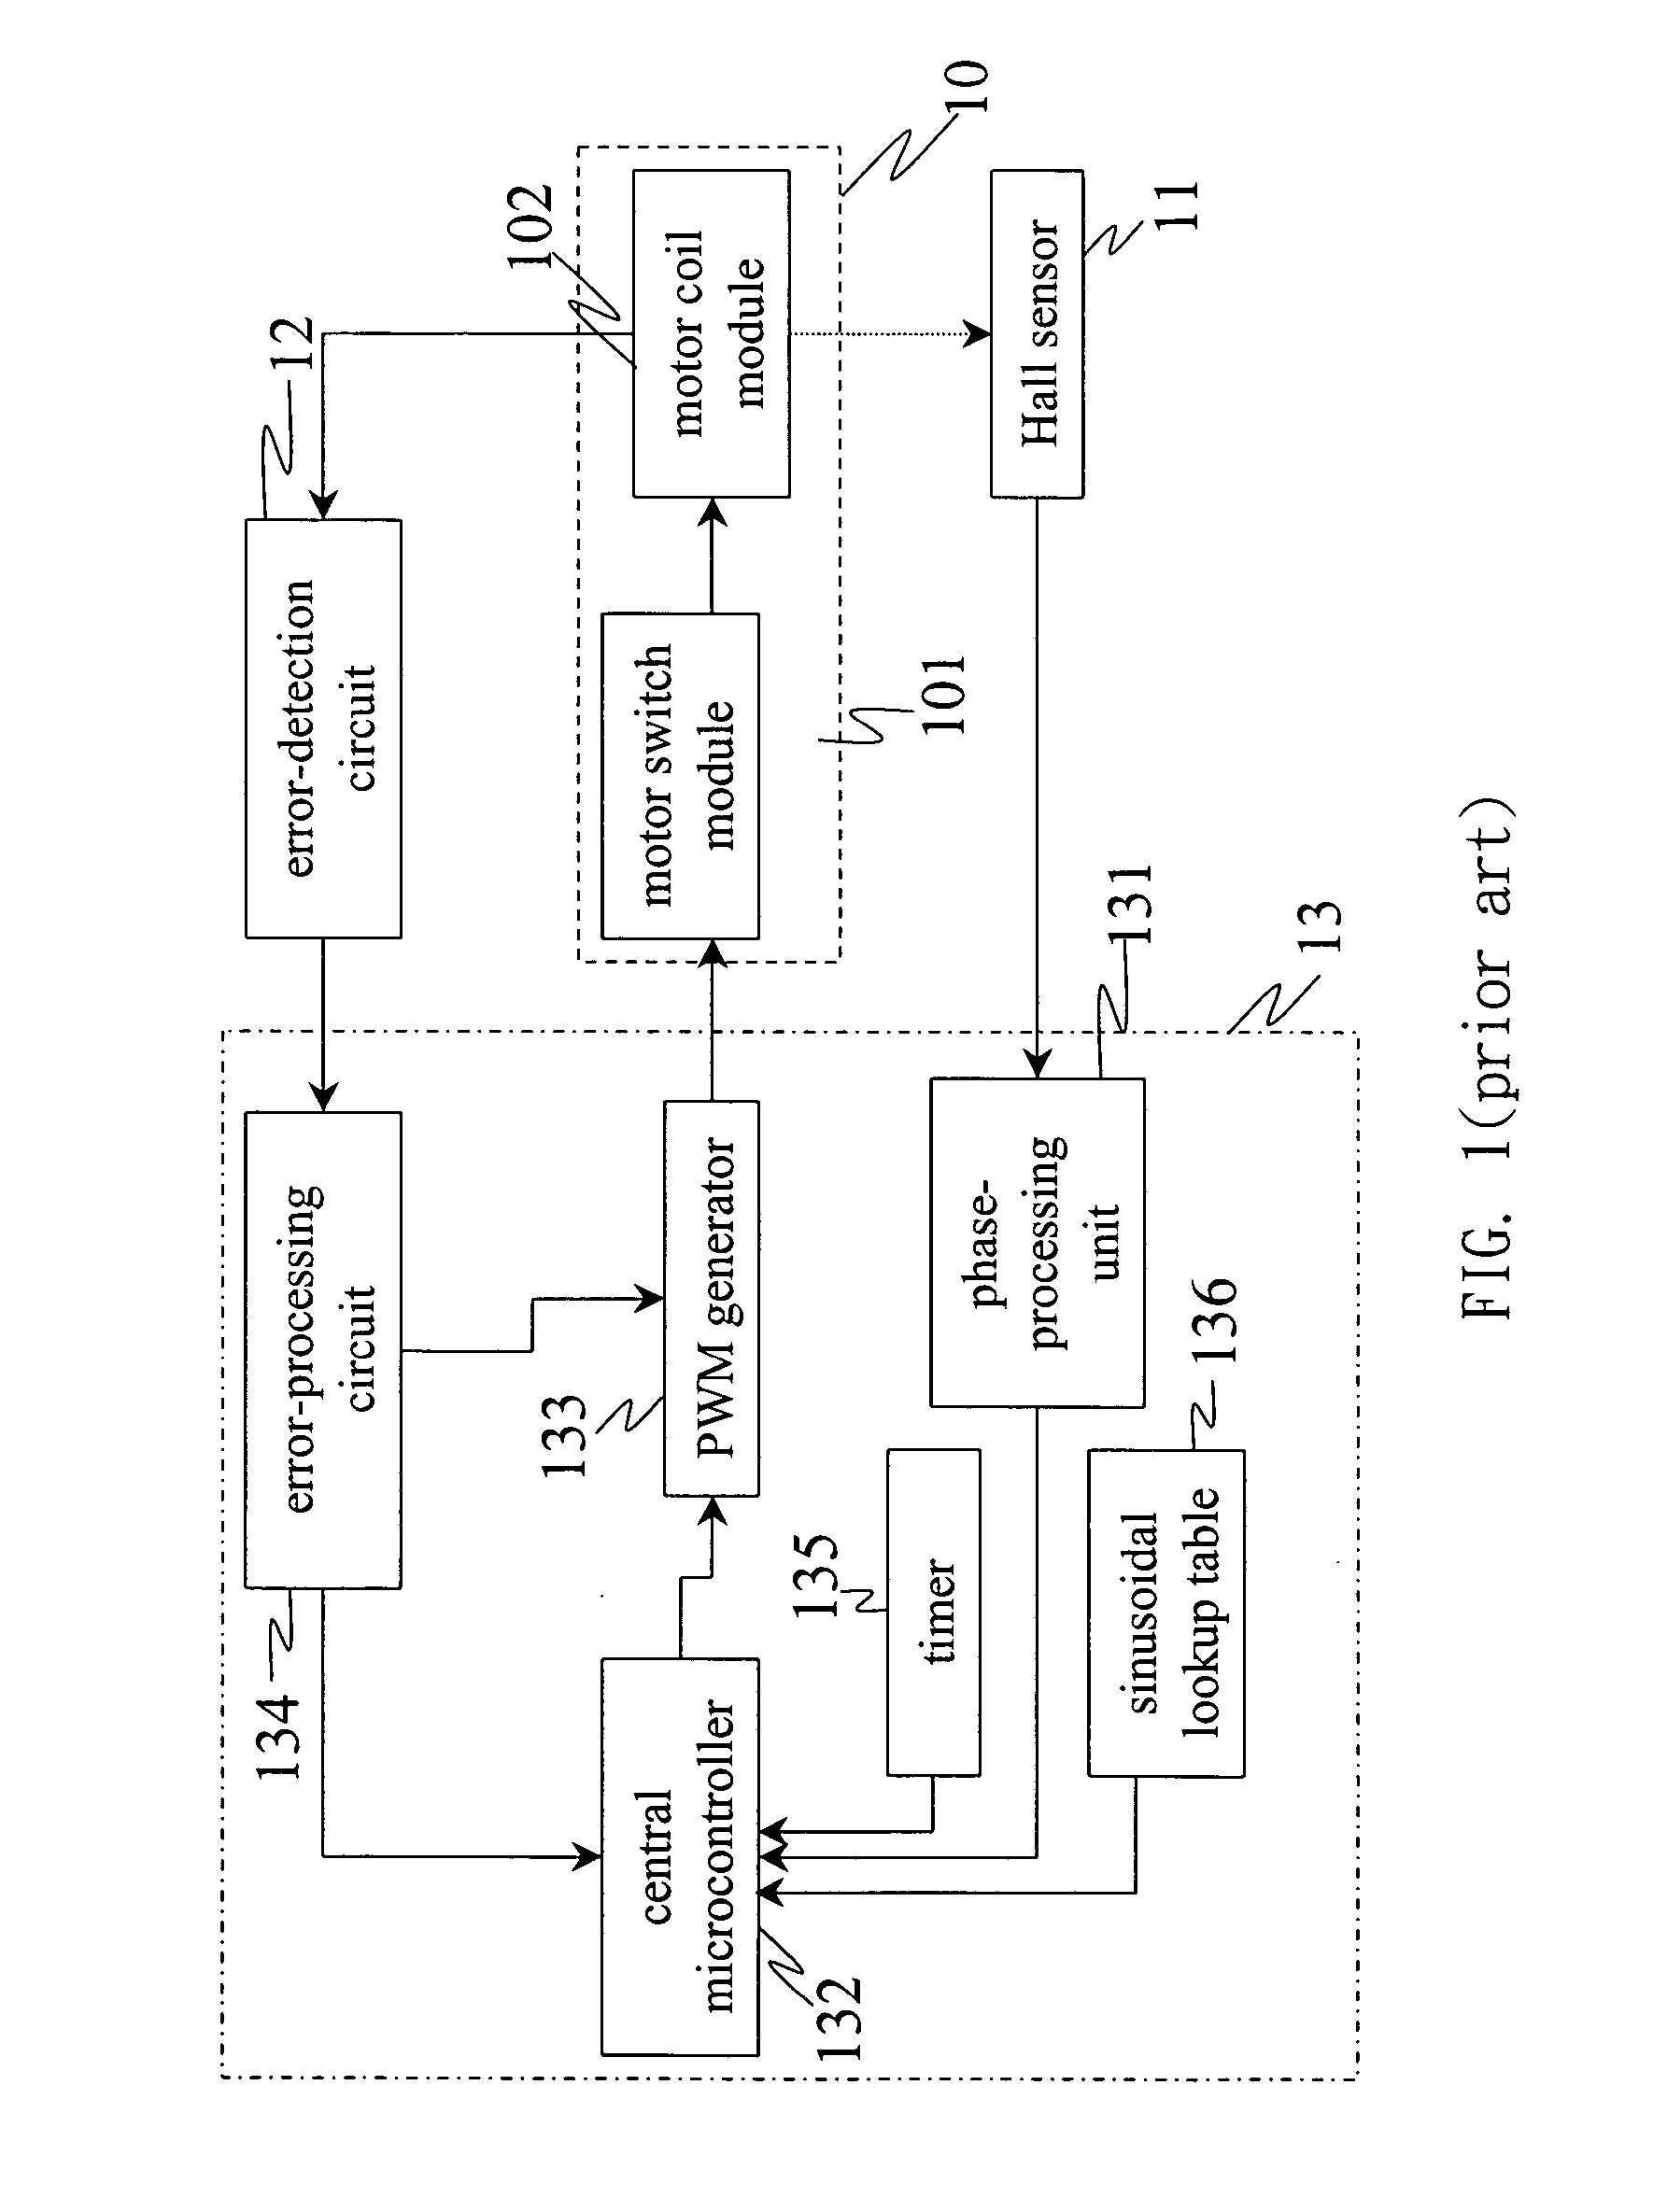 Real-time responsive motor control system